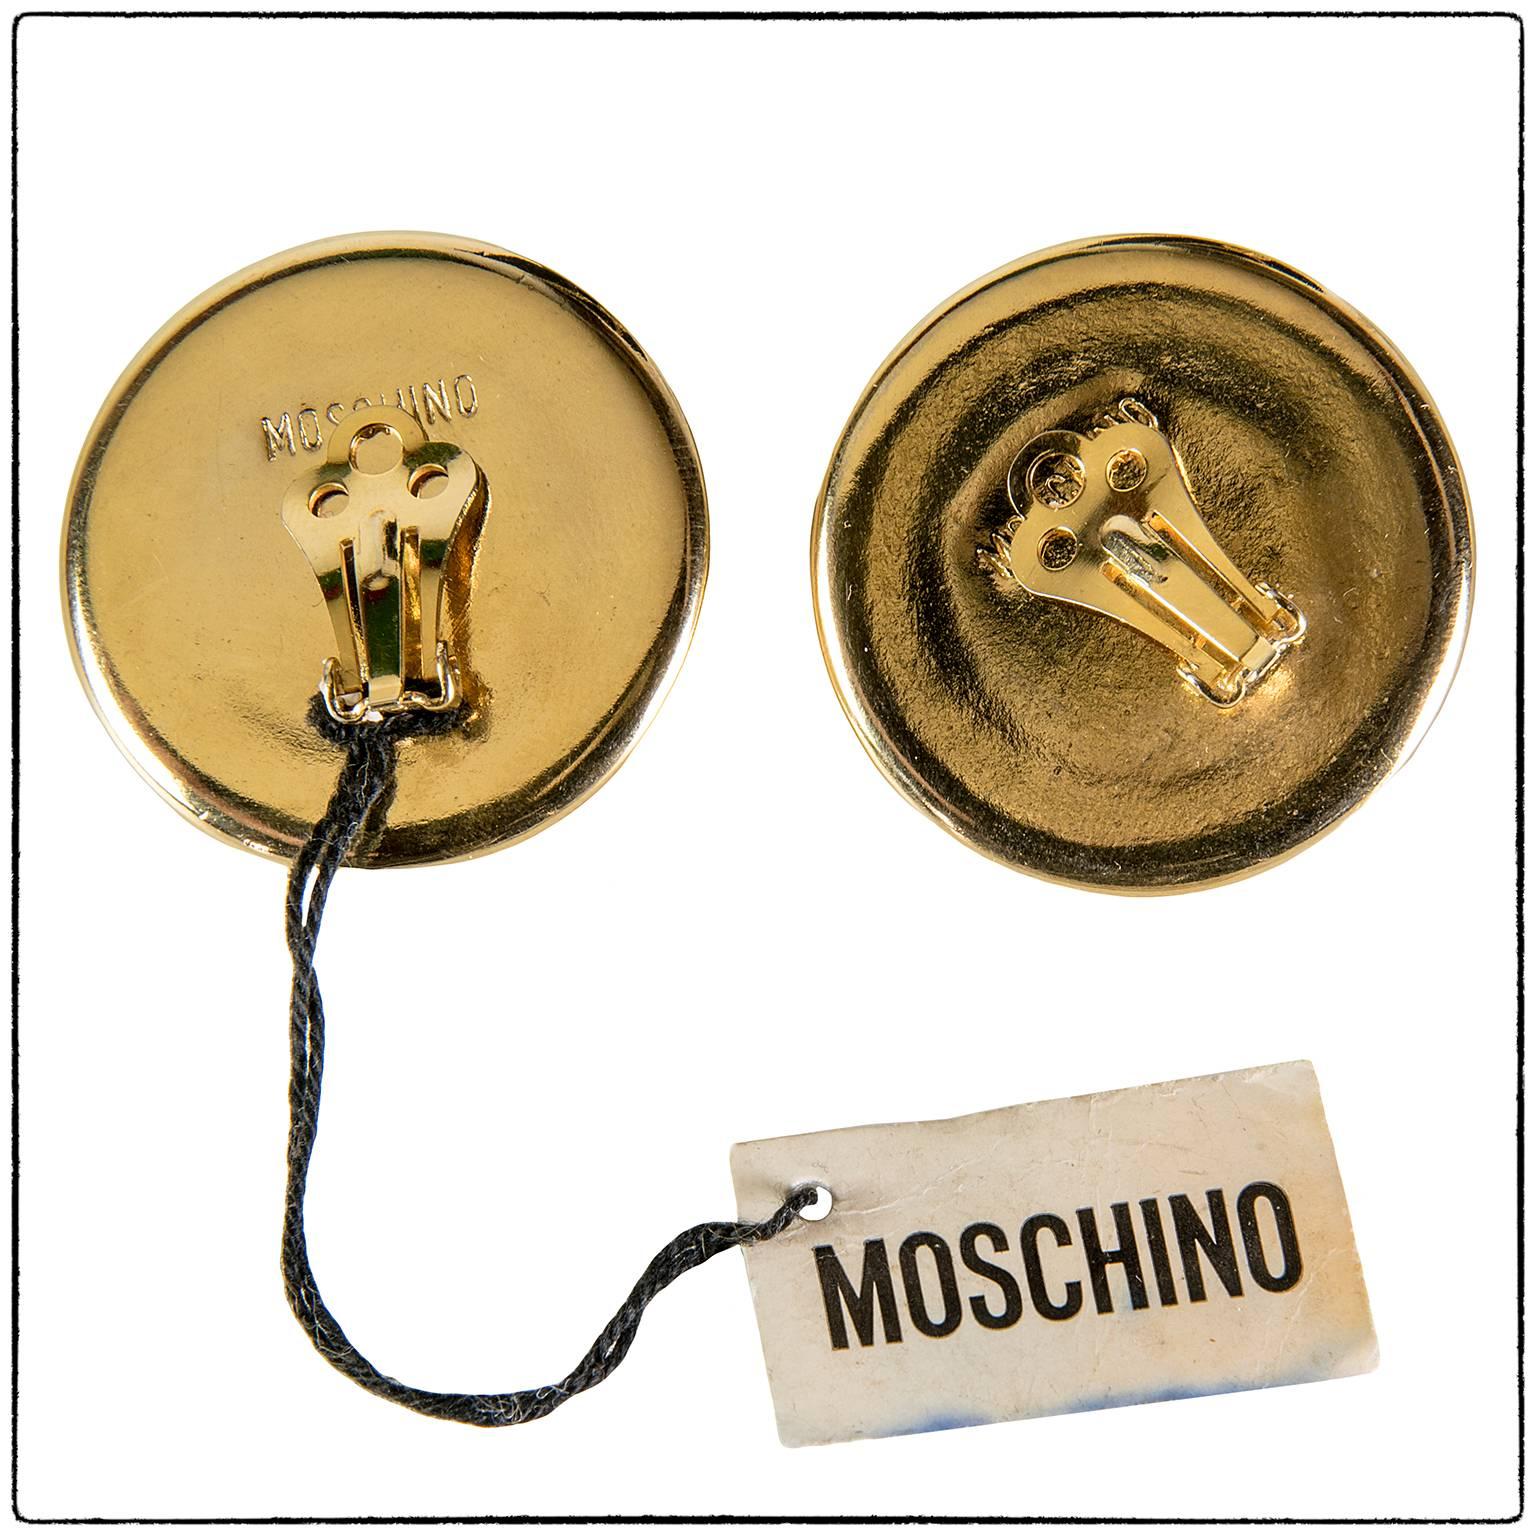 Vintage 90s Moschino gold tone metal round clip on earrings.
New from a  vintage stock
Very pop art with fun and funky Moschino style. 

Brand: Moschino

Material: gold tone metal

Condition: Good Conditions, Some light signs of wear due to the